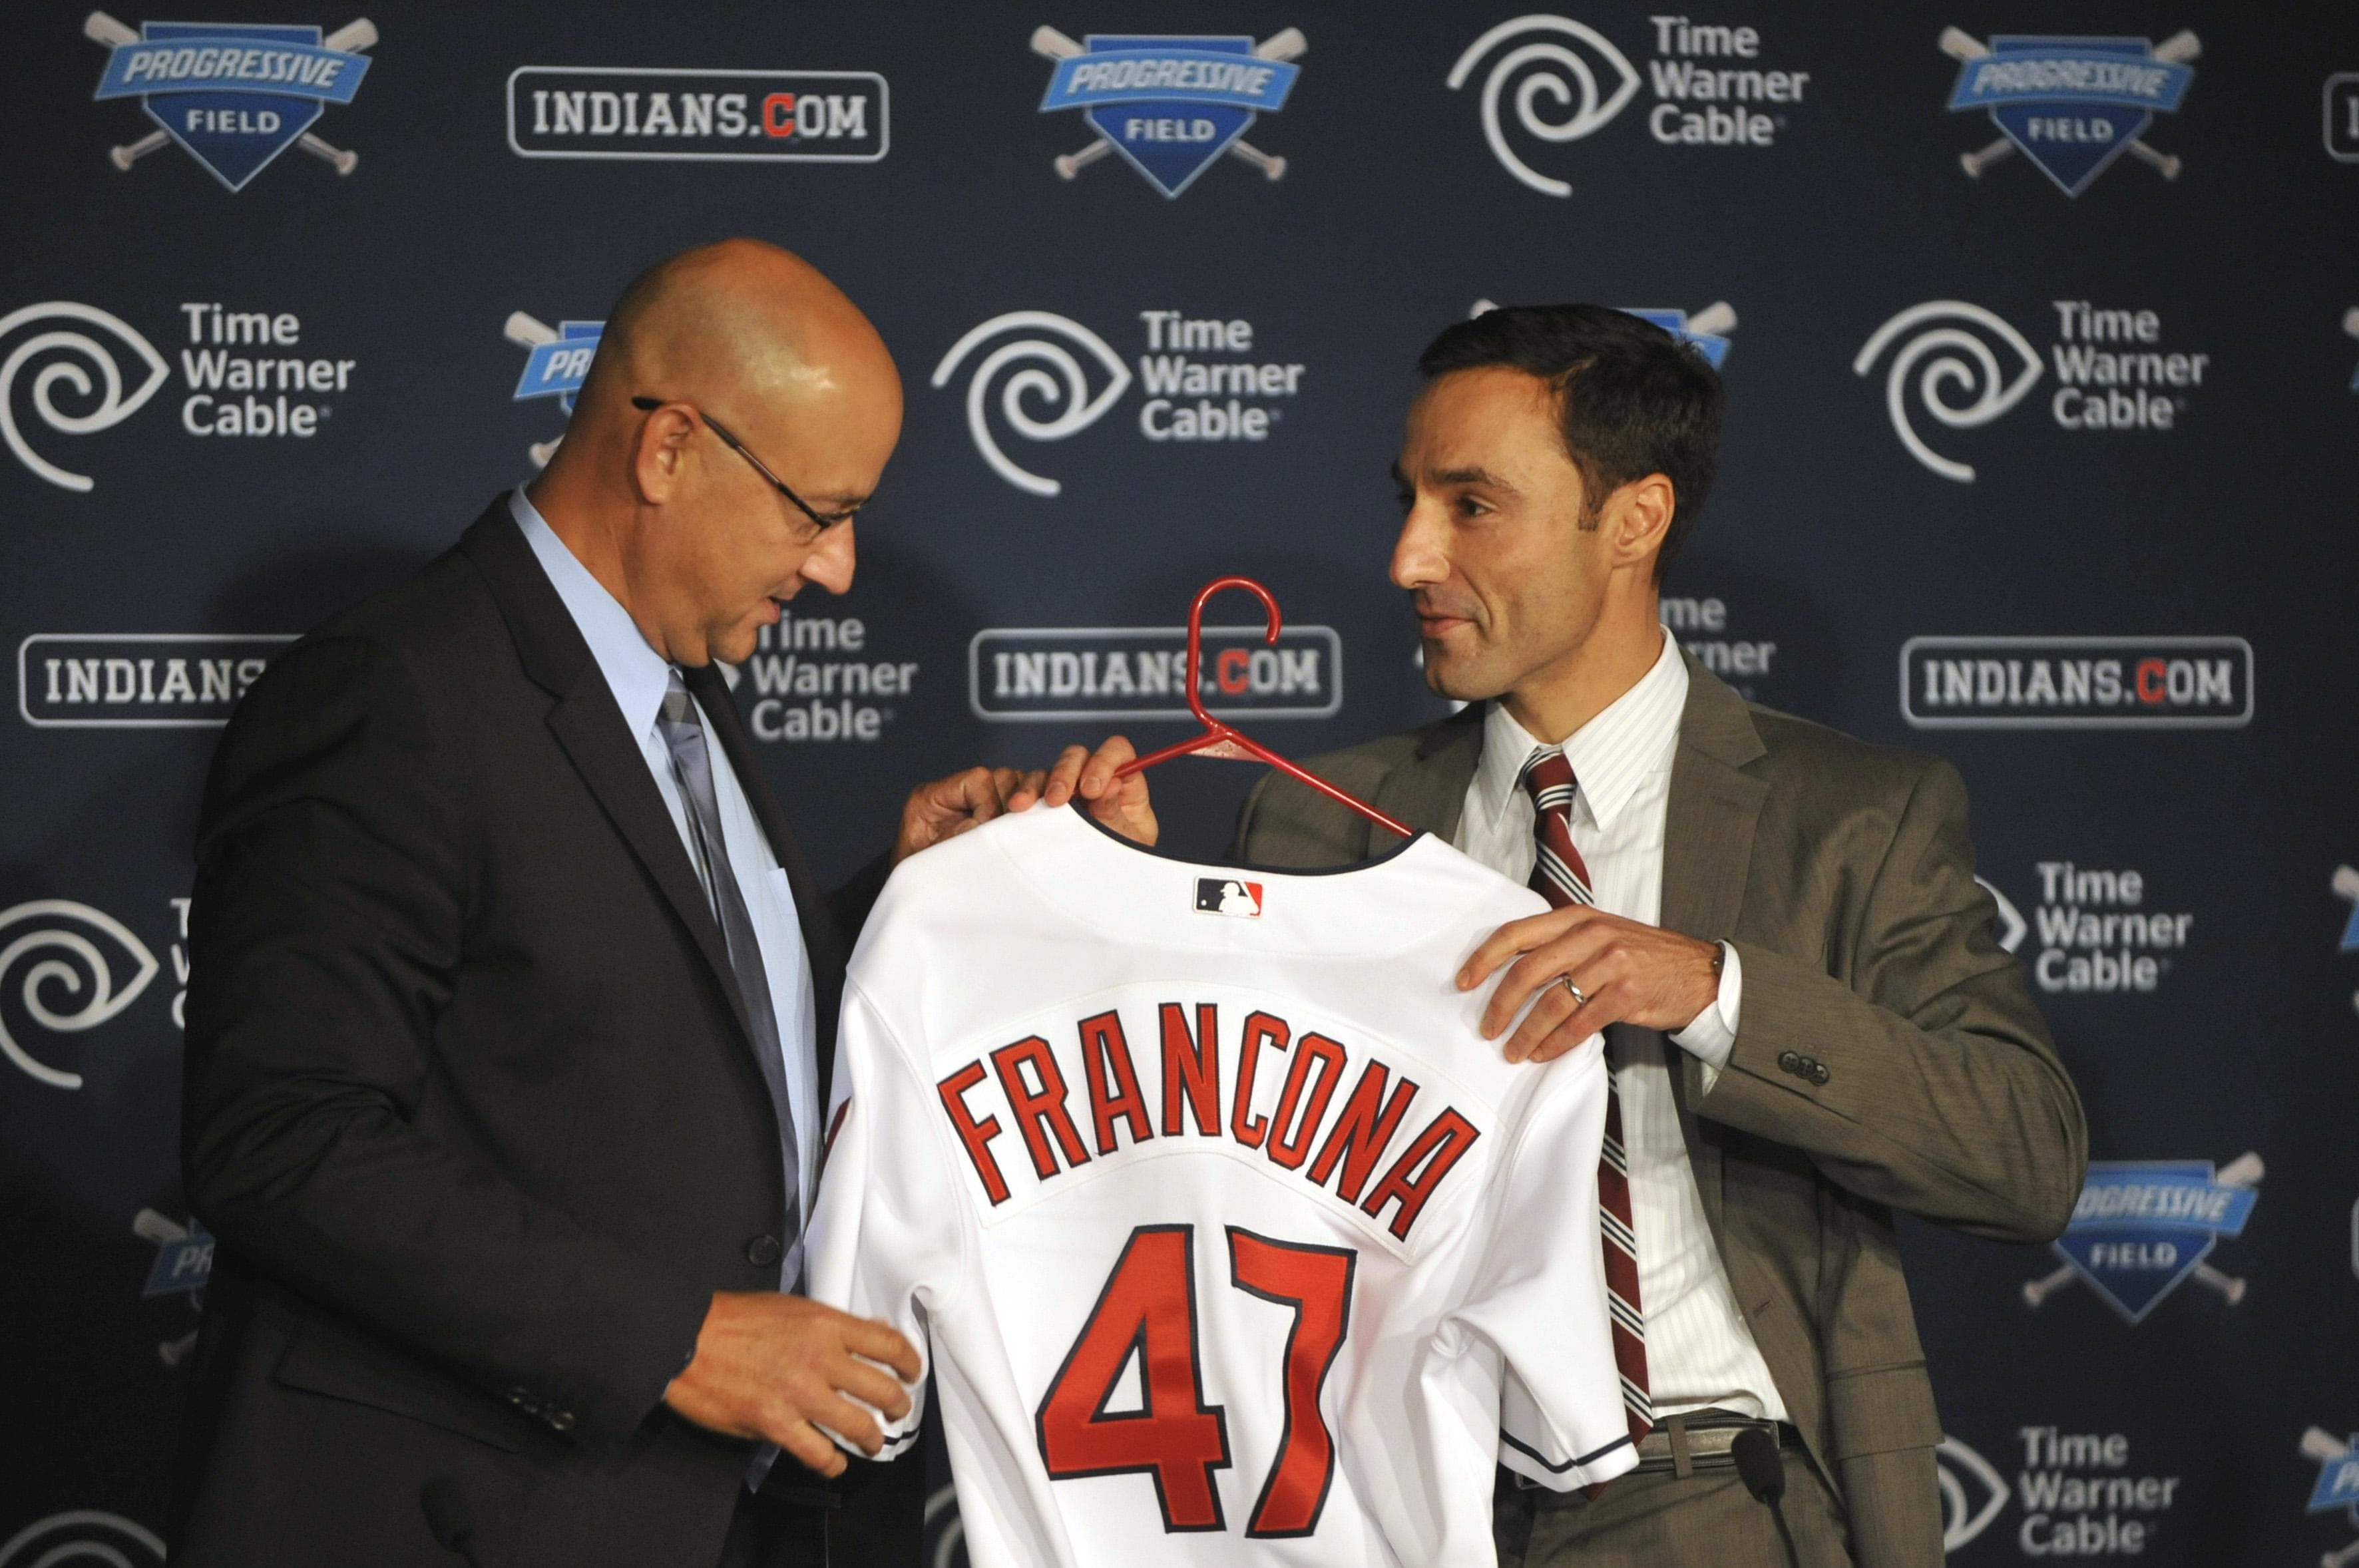 terry francona jersey number